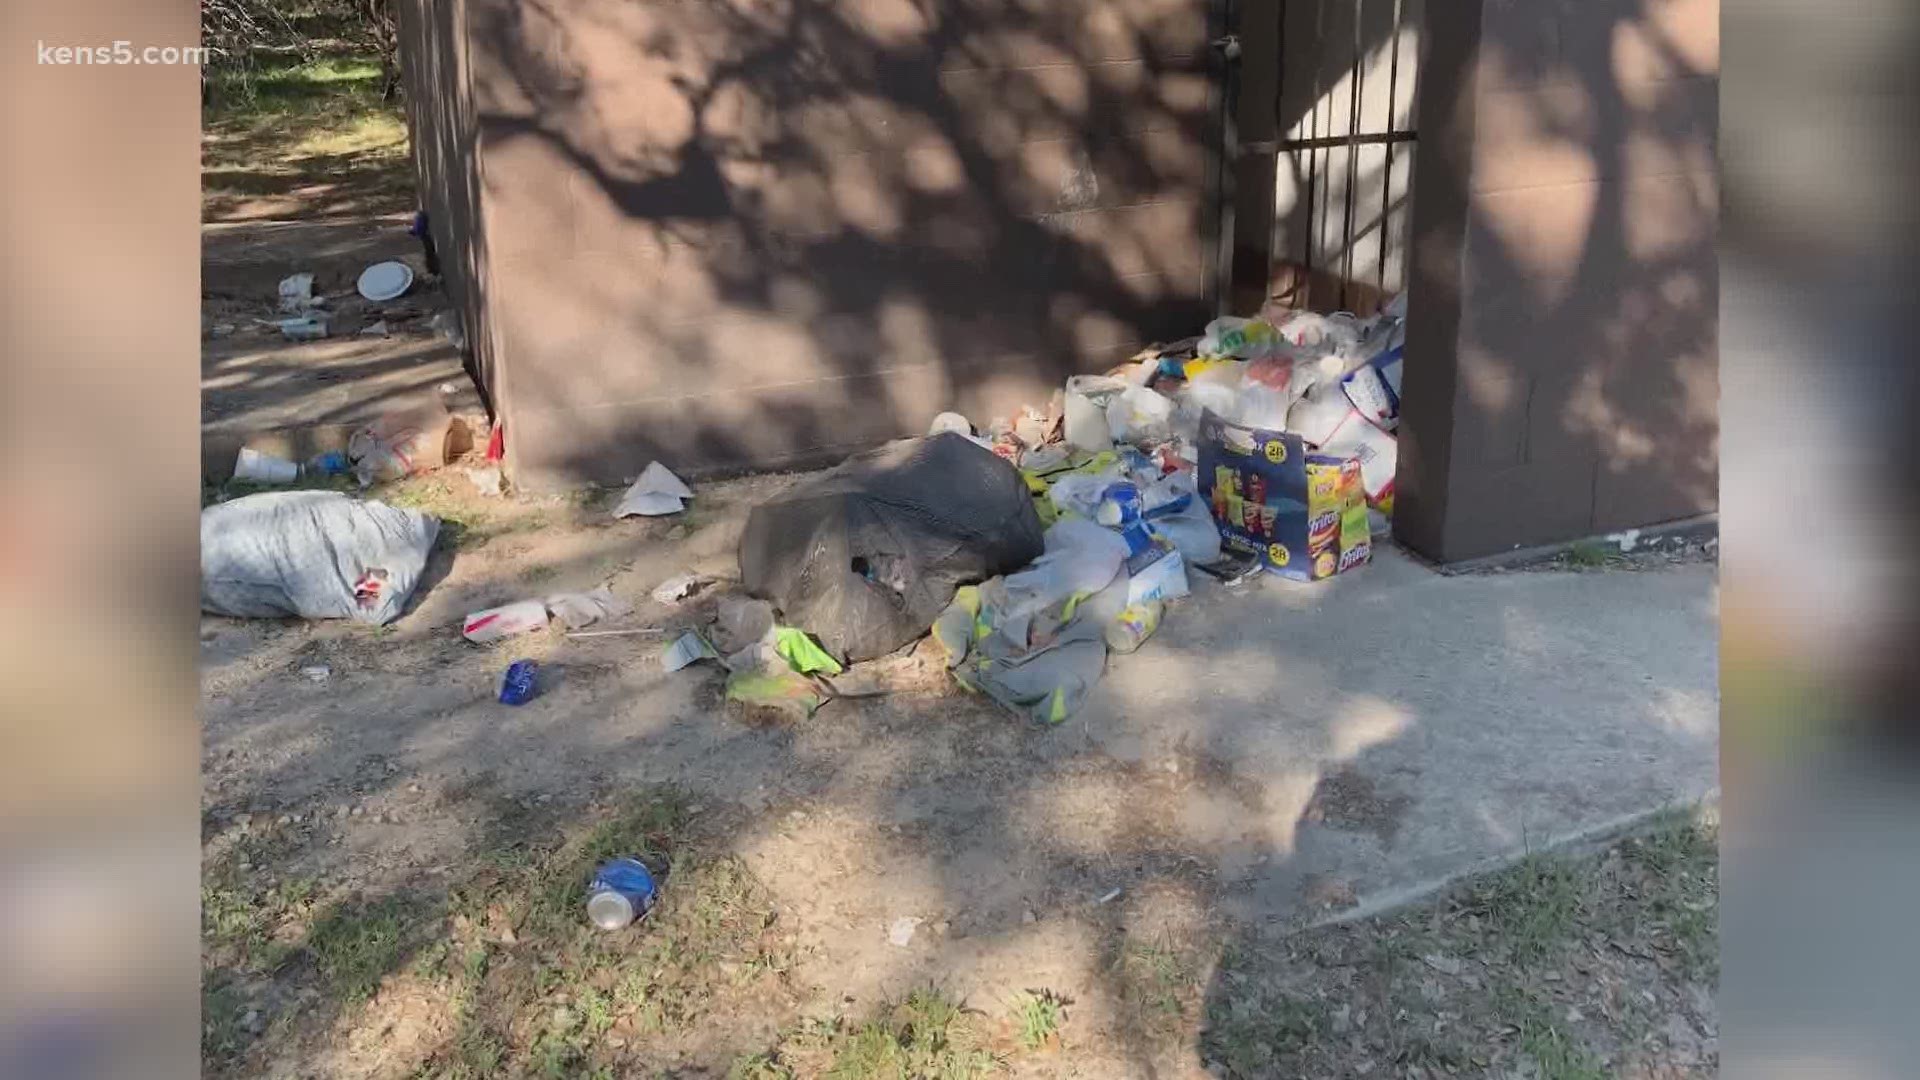 Local homeowners say visitors keep making a mess of the area by leaving trash on the ground and not packing out what they bring in.